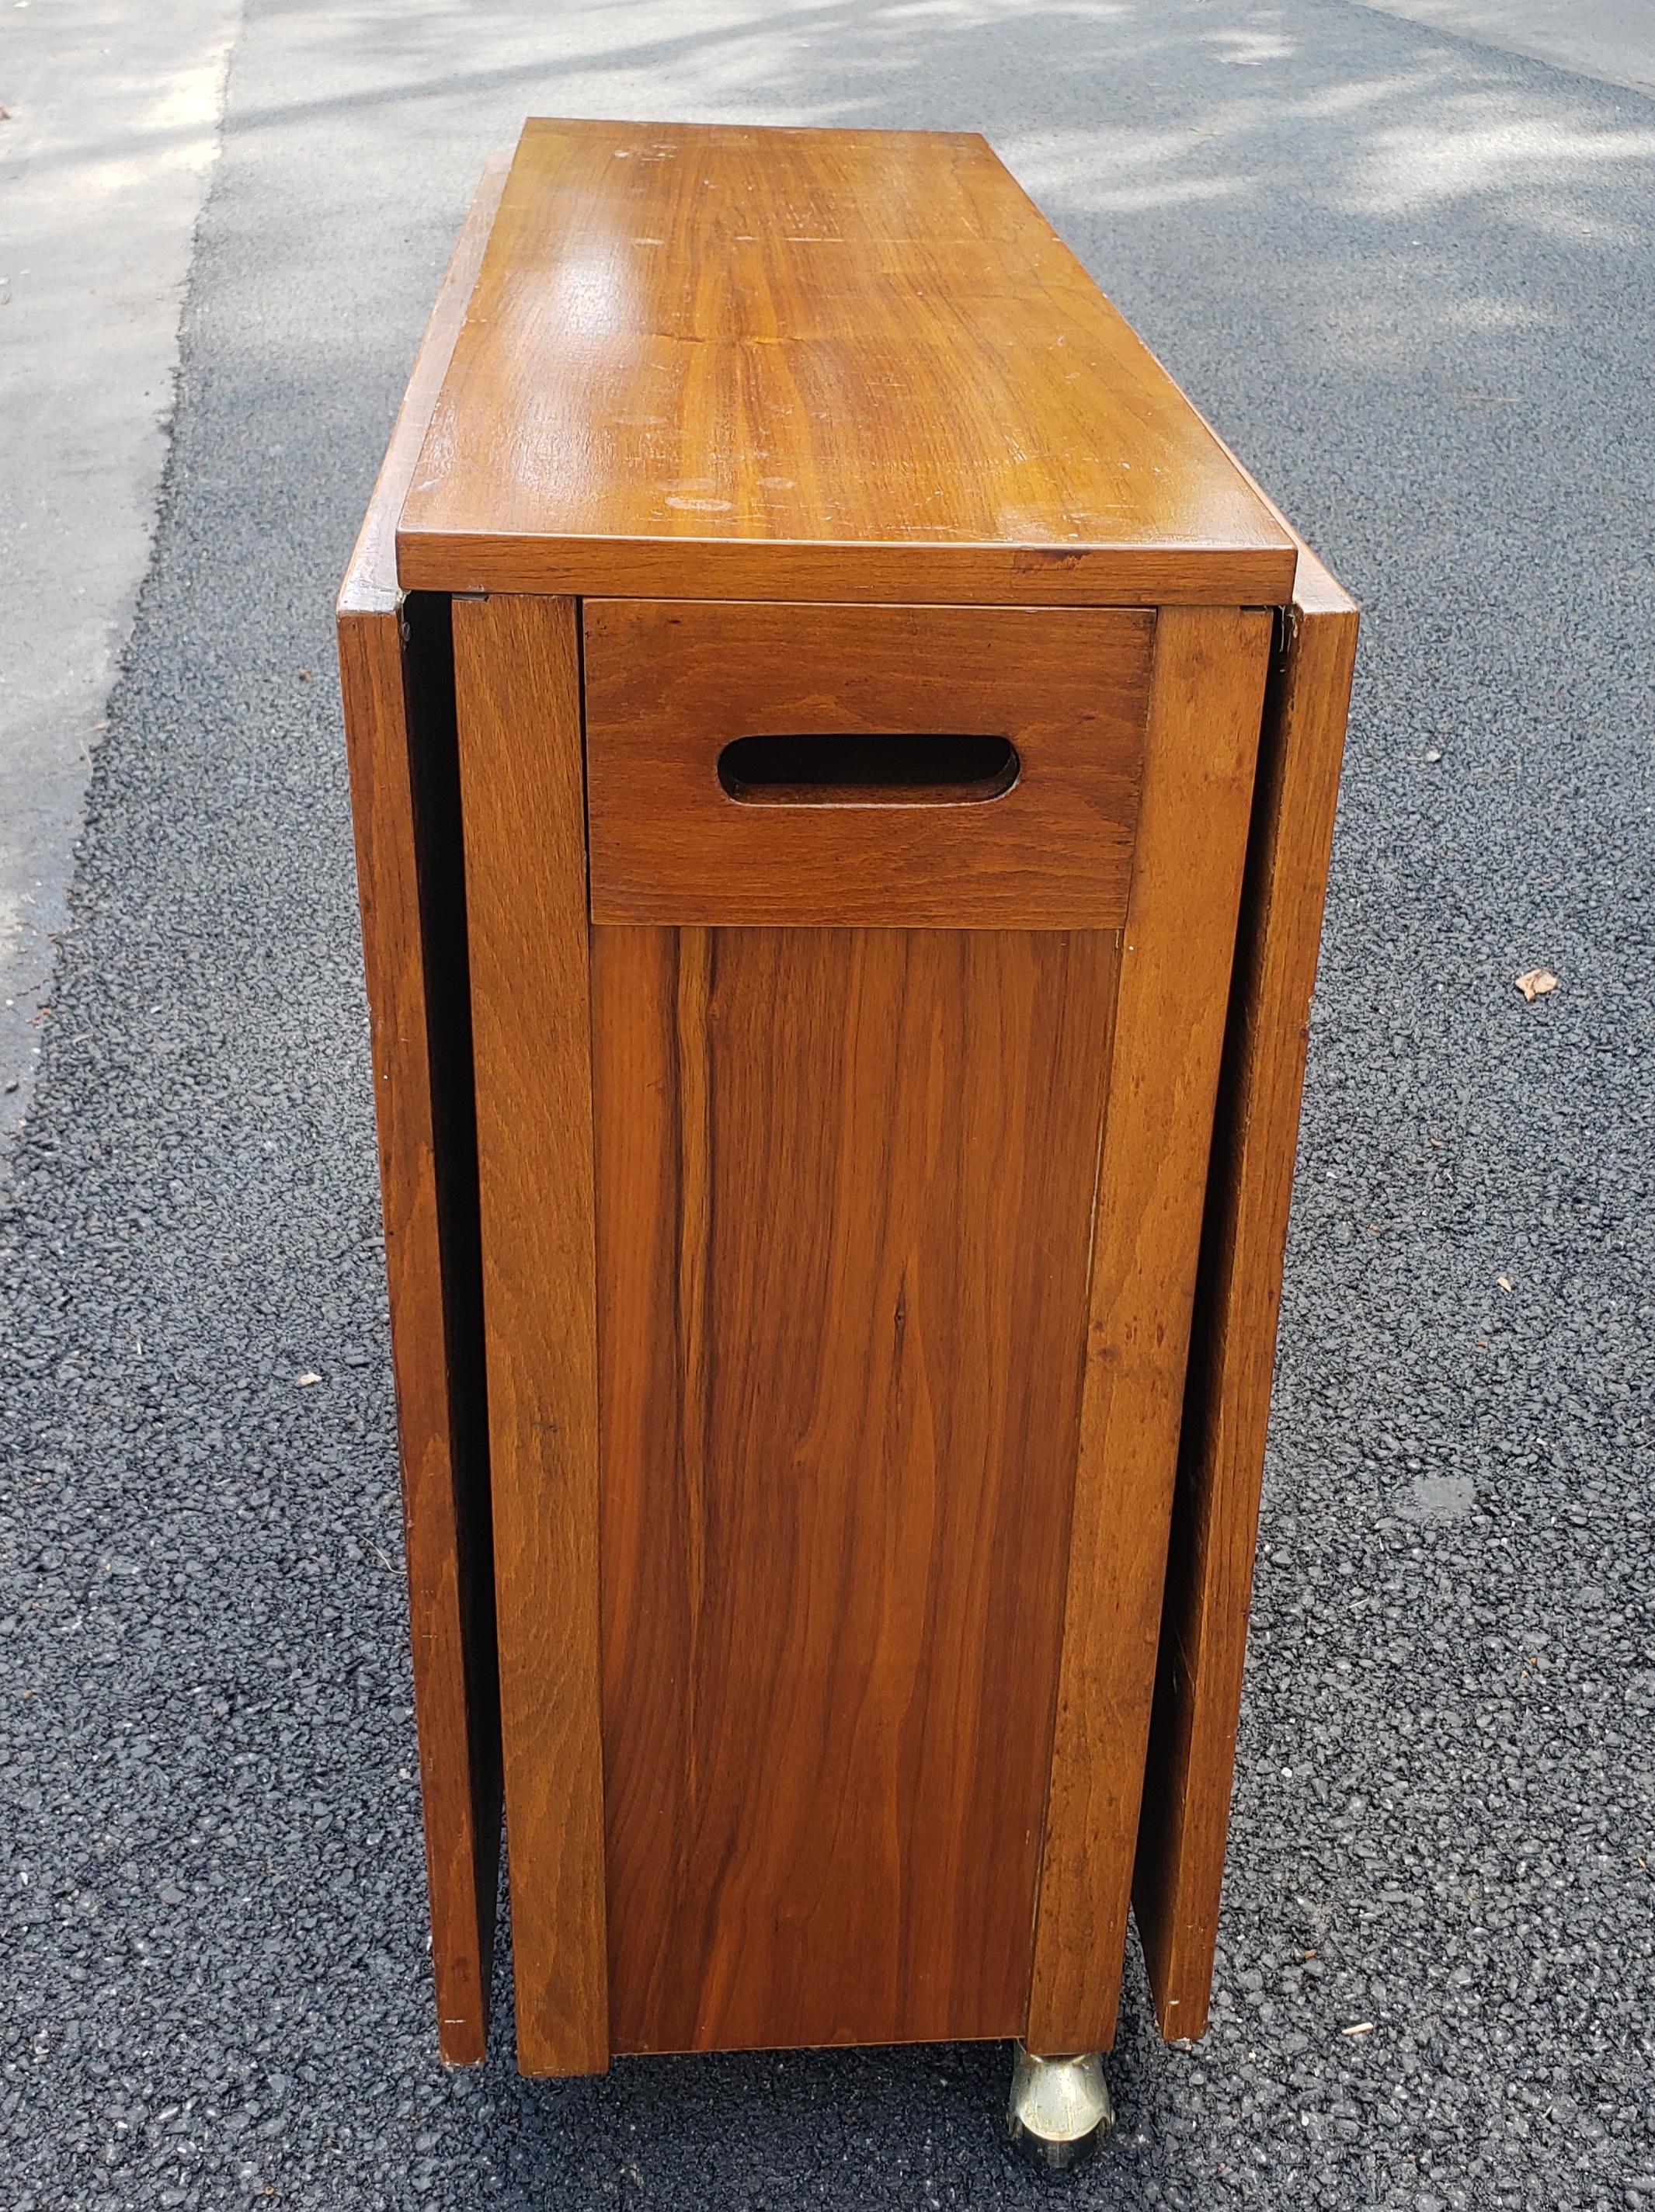 Mid-Century Danish Modern Teak Drop-Leaf Dining Table with Storage on Rollers. Leaves drop to make a compact 12.5